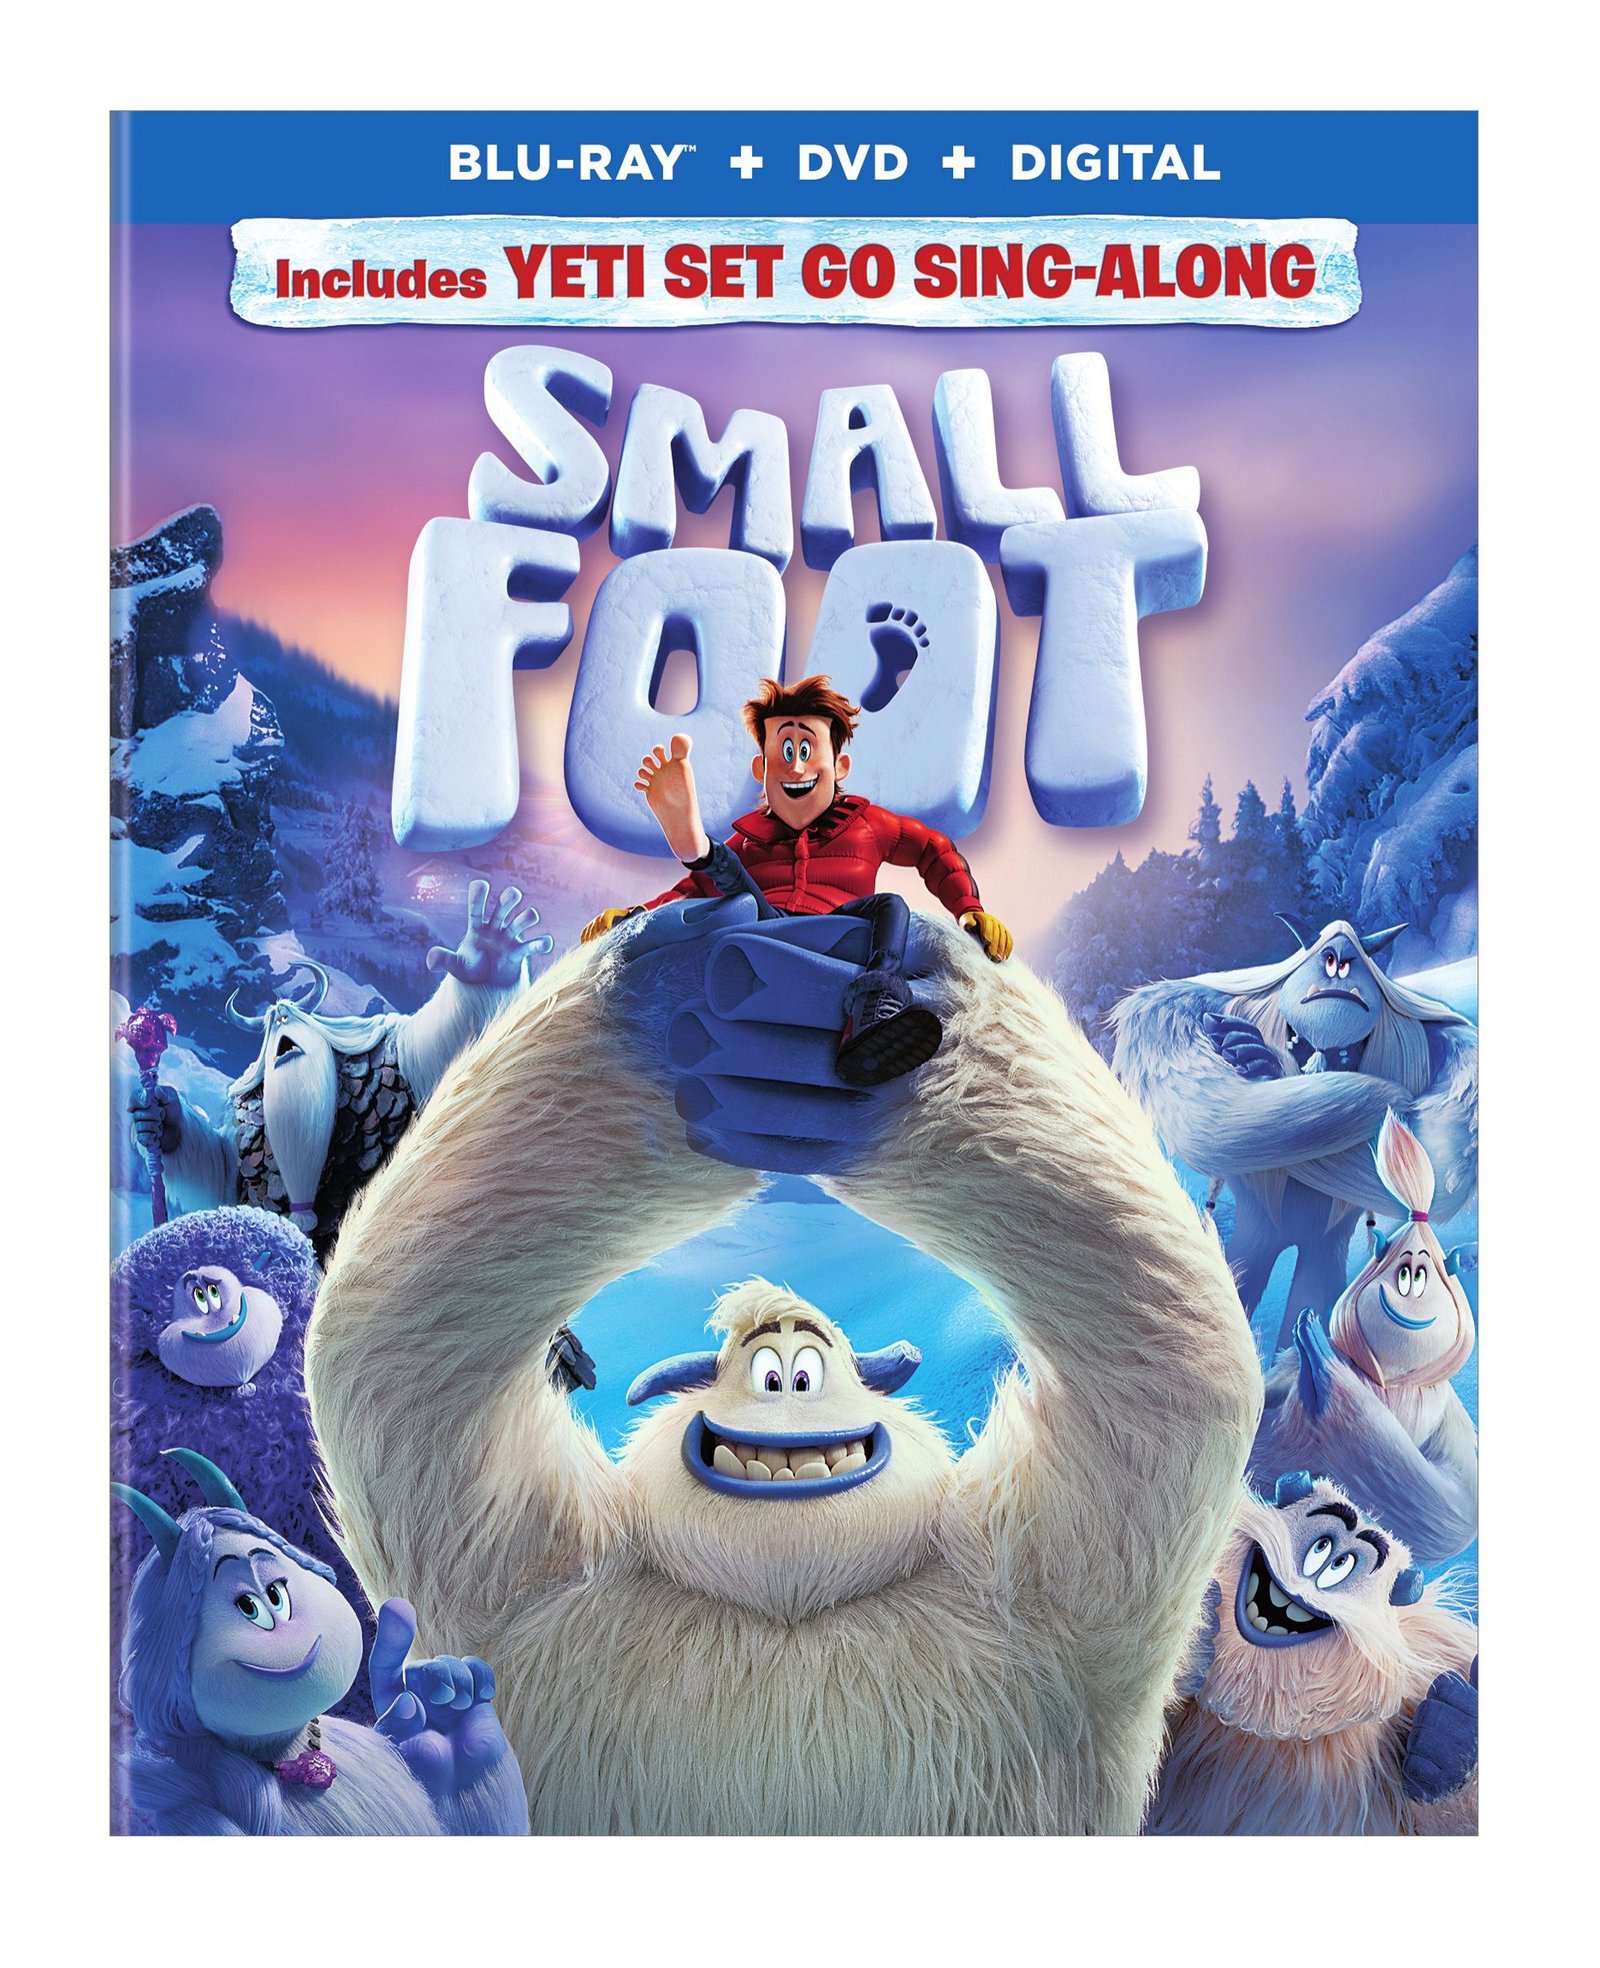 SMALLFOOT Out On Digital and Blue-Ray 